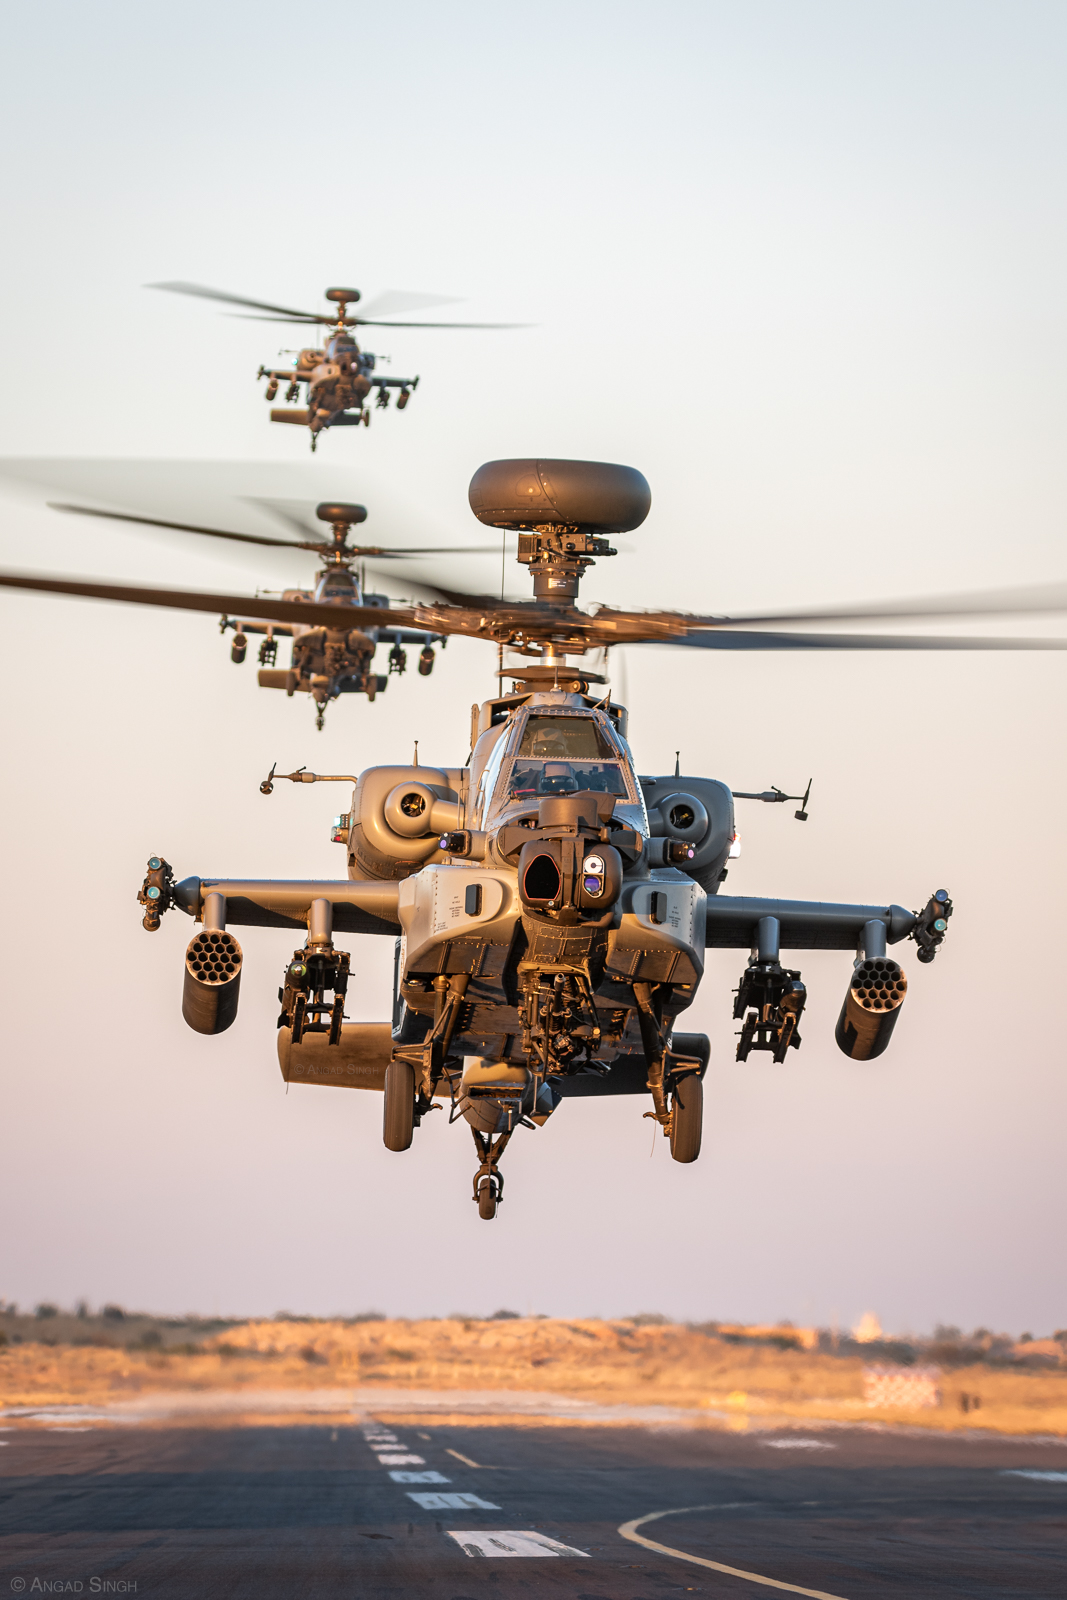 Returning from the range, a trio of AH-64E Apaches stacks up over the runway before touching down. <em>Angad Singh</em>